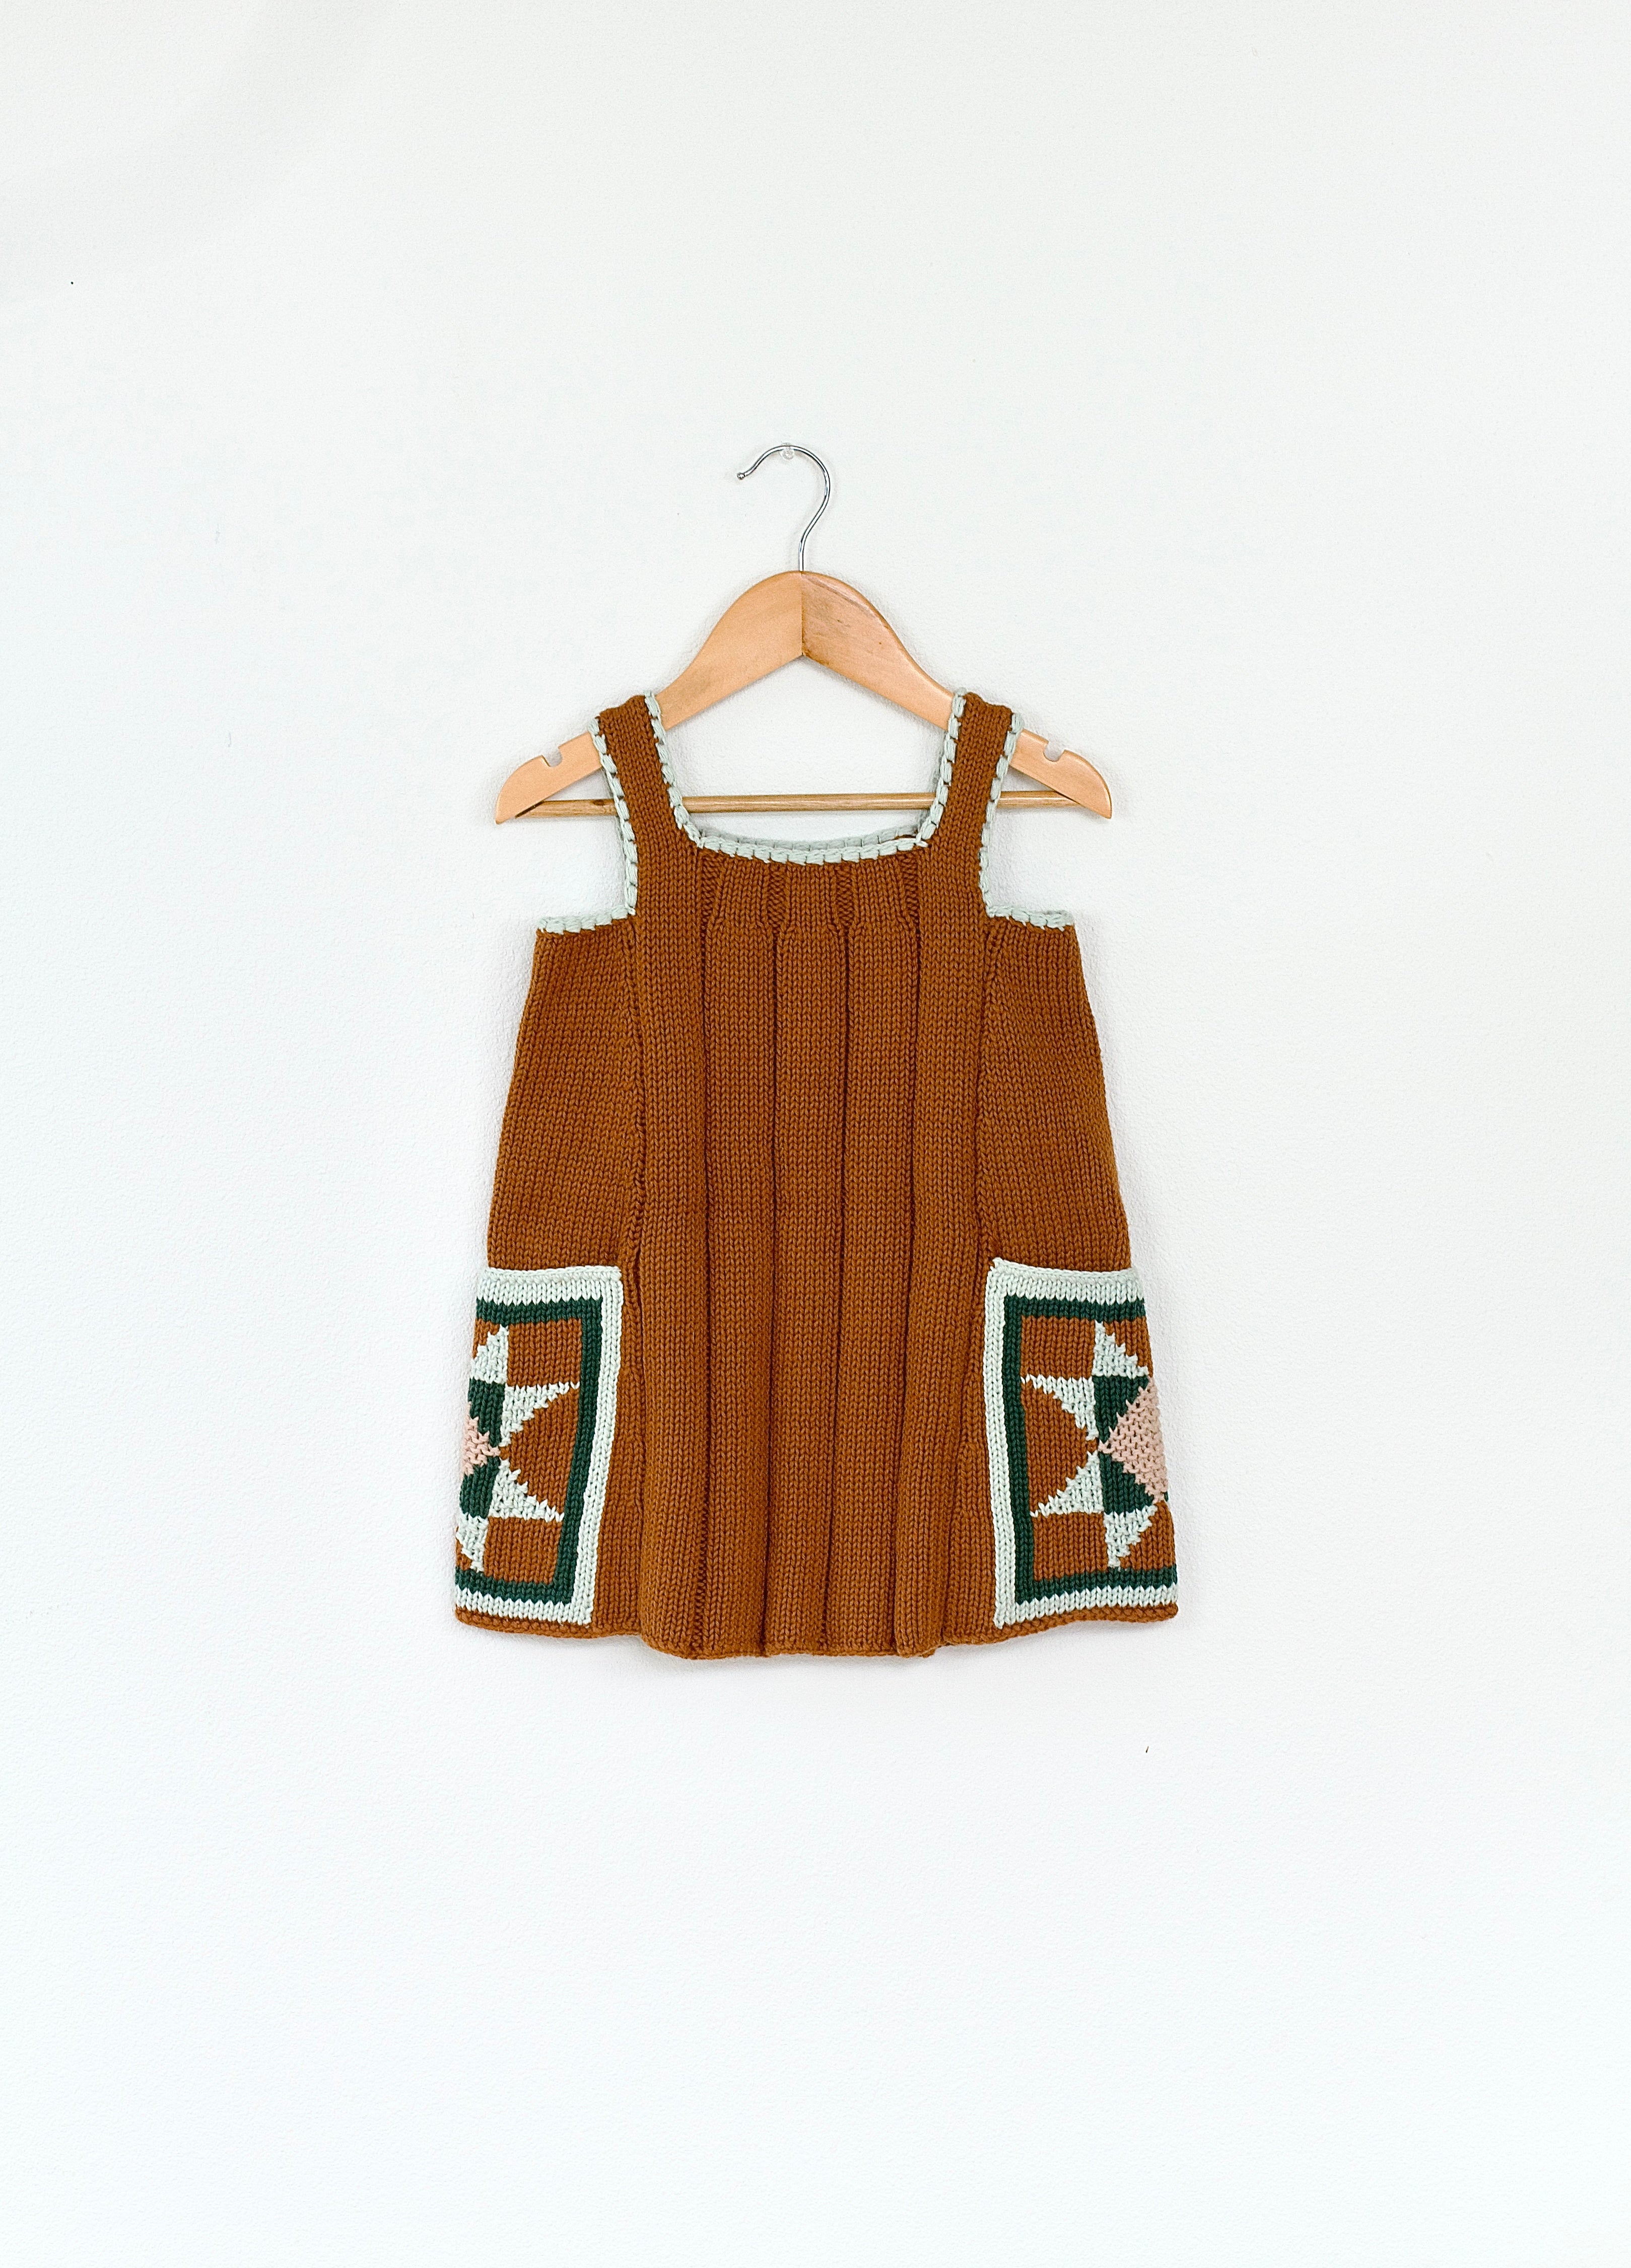 iver and ilsa patchwork quilt overalls - キッズ服(男女兼用) 100cm~